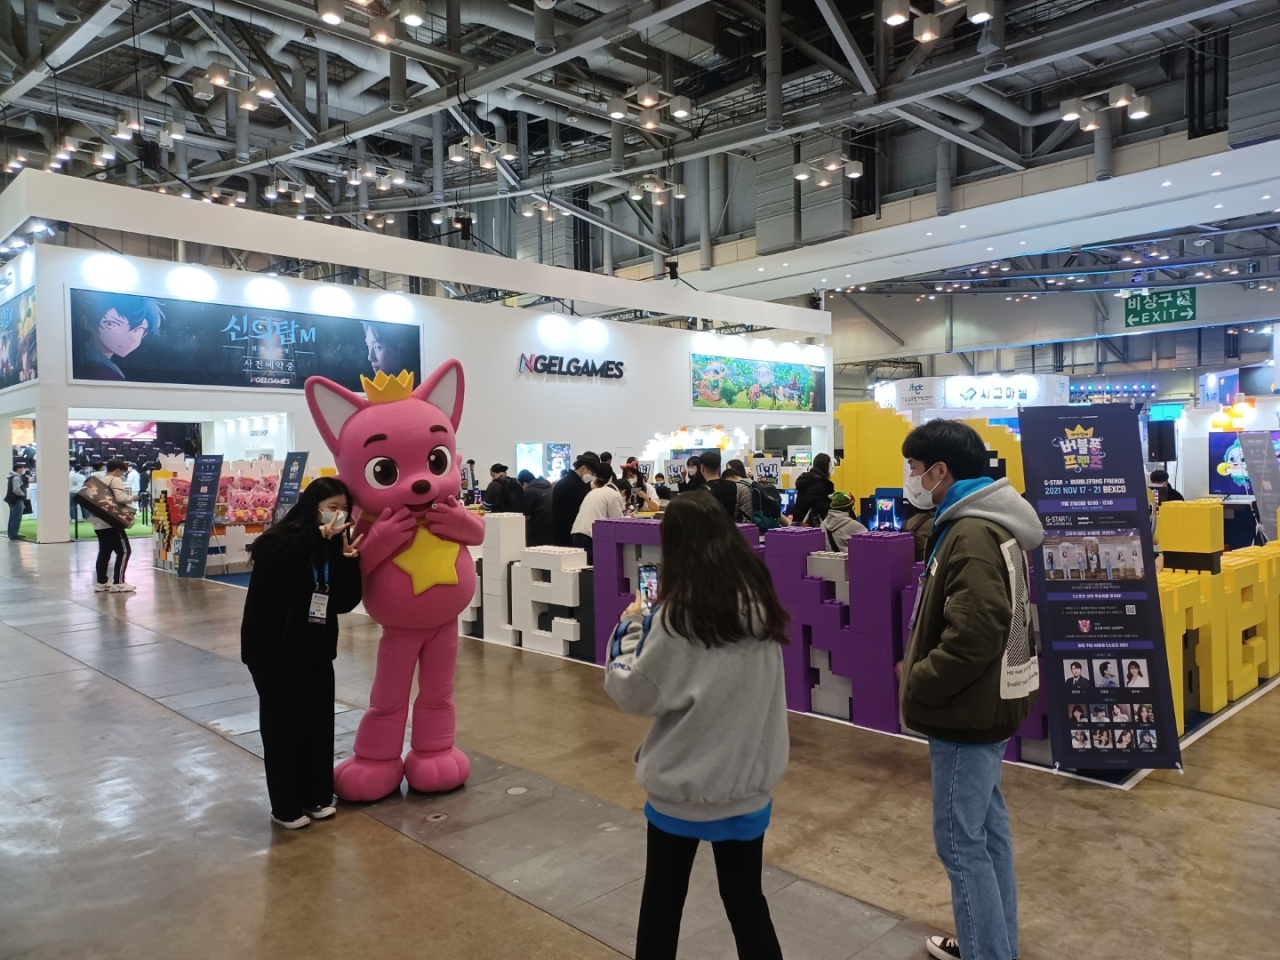 A visitor takes a photo with Pinkfong at the Bubblefong Friends venue at G-Star. (Lee Si-jin/The Korea Herald)